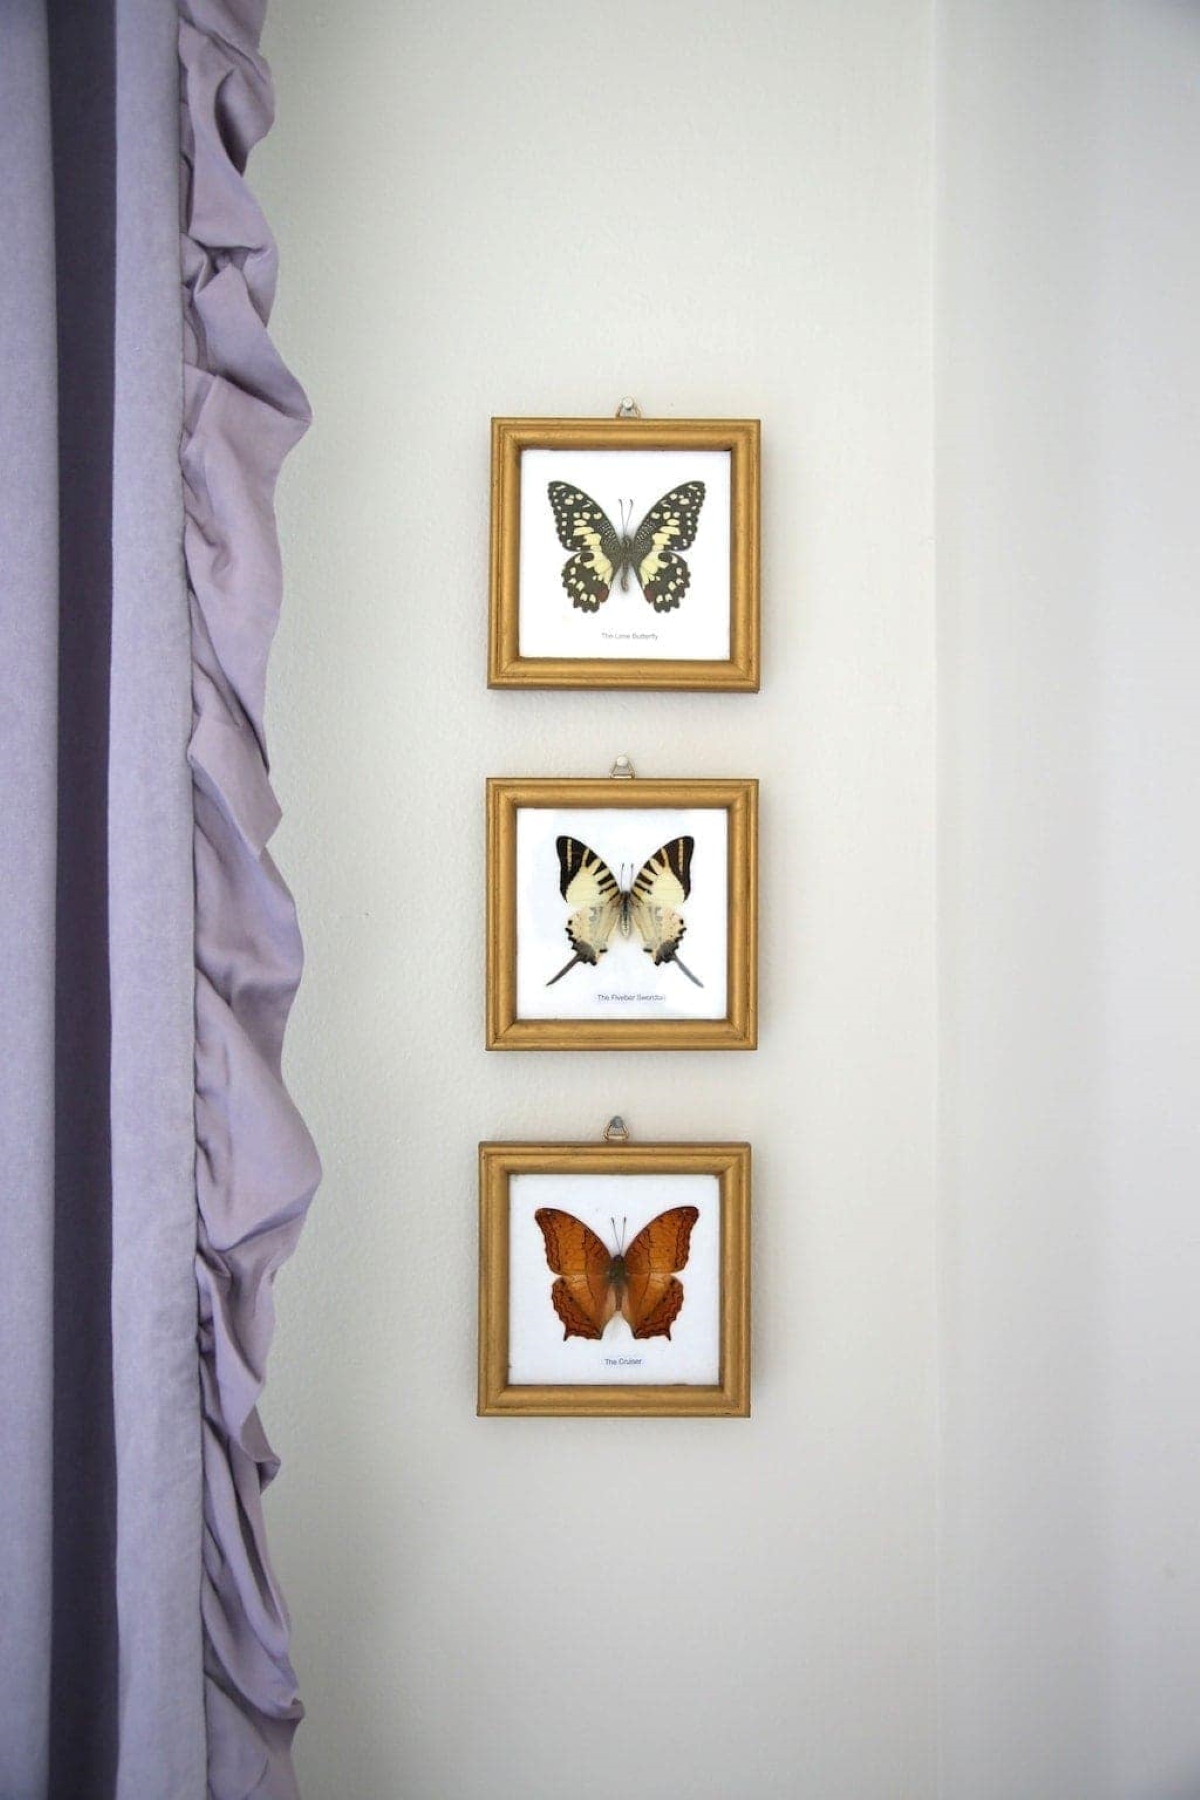 Three small butterflies framed in frames that are aged gold with rub n buff, next to a lavender curtain panel.